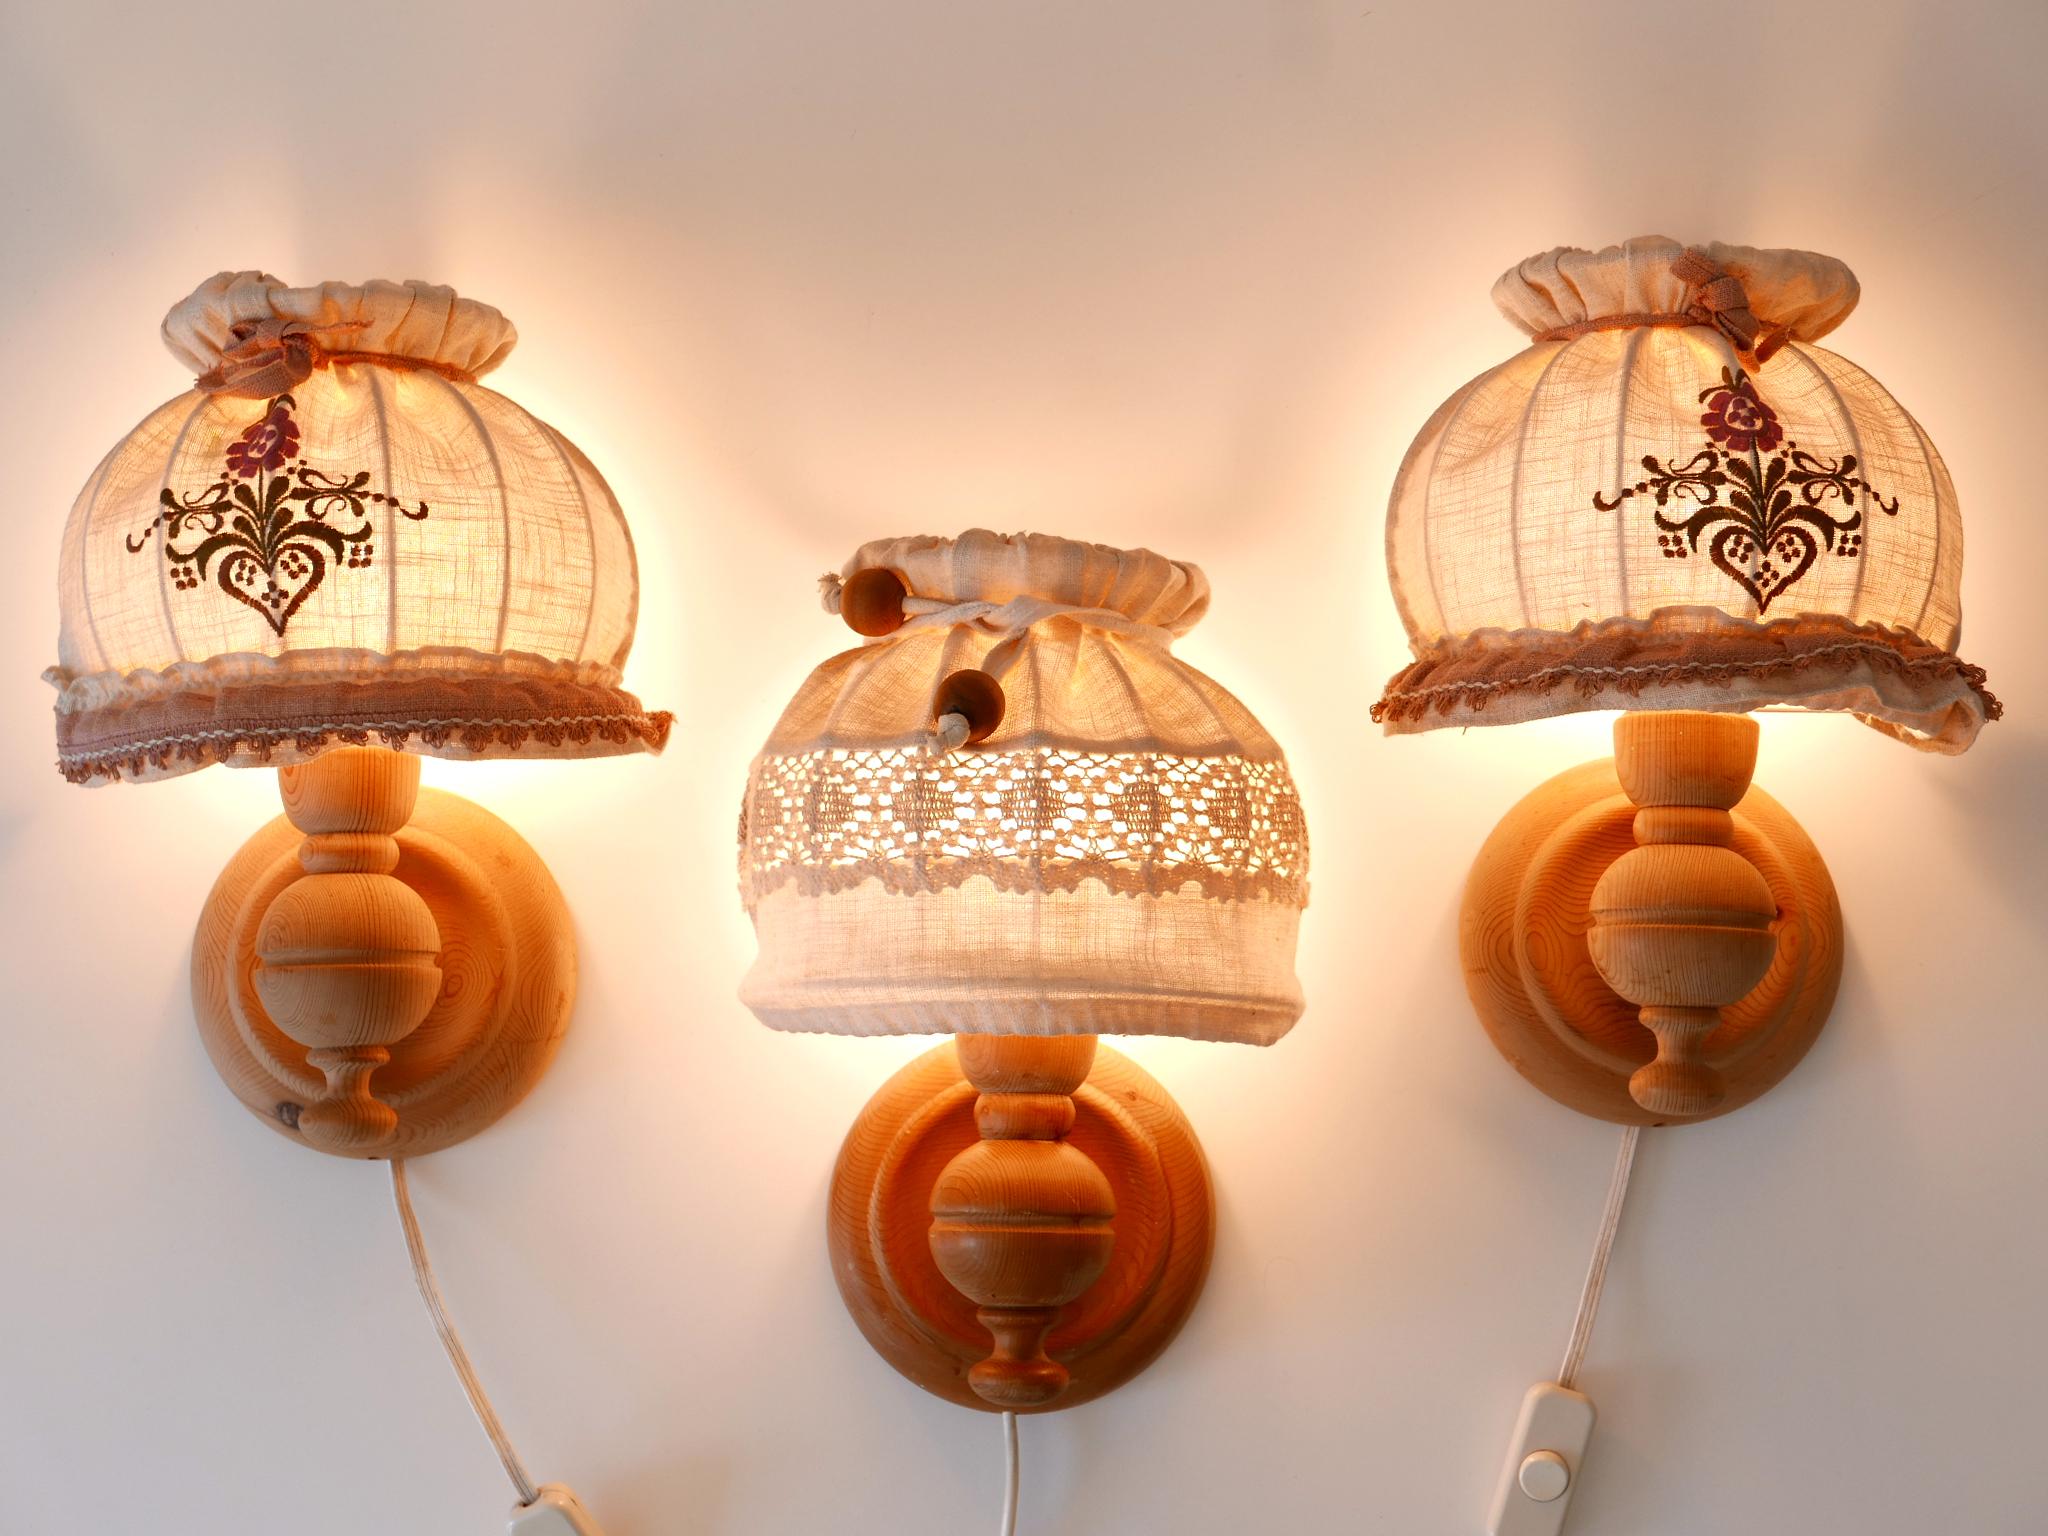 Set of three lovely and elegant Mid-Century Modern rustic sconces or wall lamps. Designed and manufactured probably in Sweden, 1970s.

Executed in pine wood and fabric, each pendant lamp has 1 x E27 / E26 Edison screw fit bulb socket, is wired and